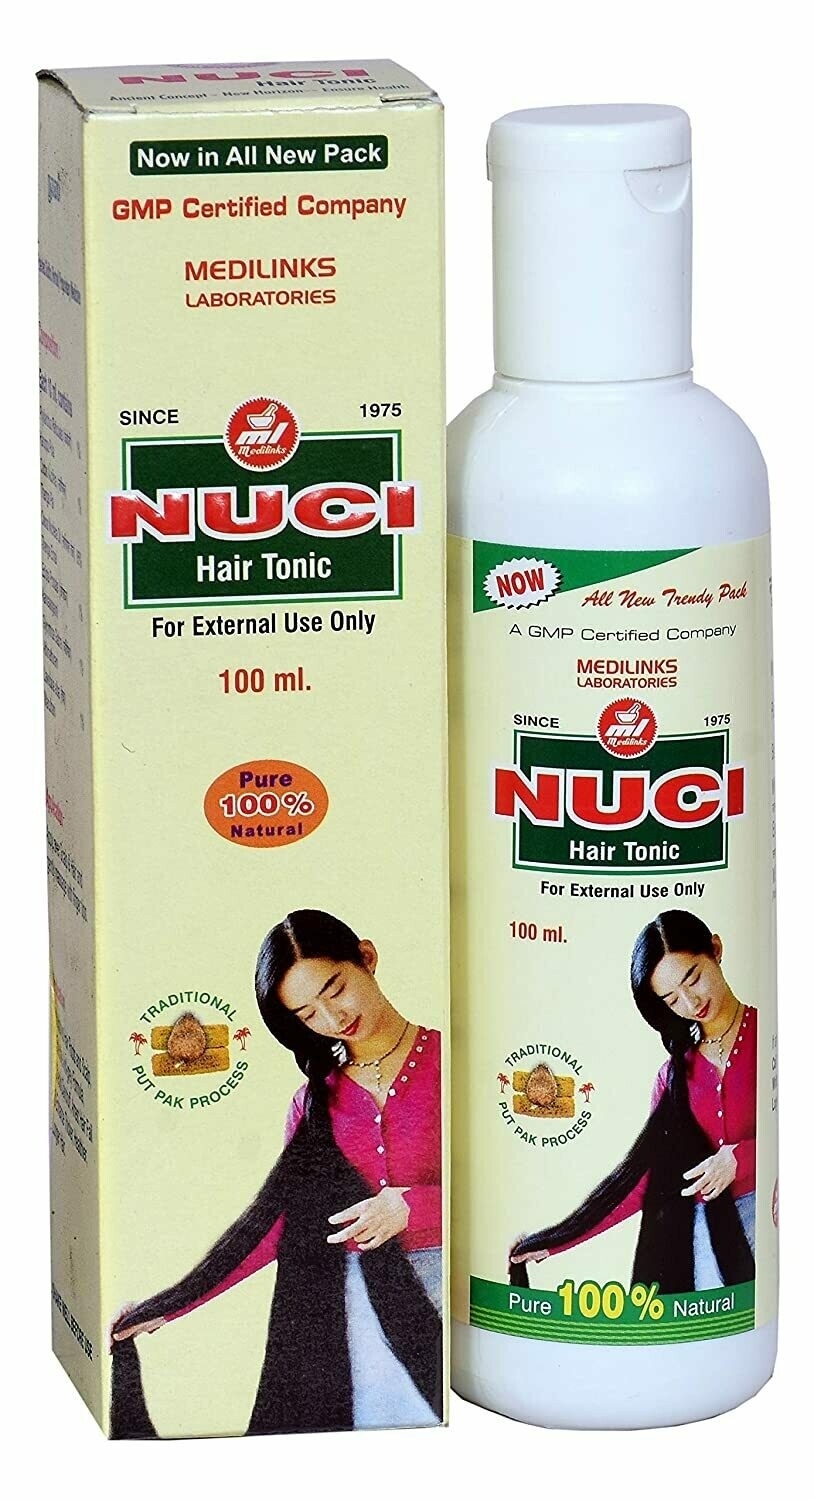 Syrup Nuci Hair Tonic For Personal Medilinks Laboratories 100ml